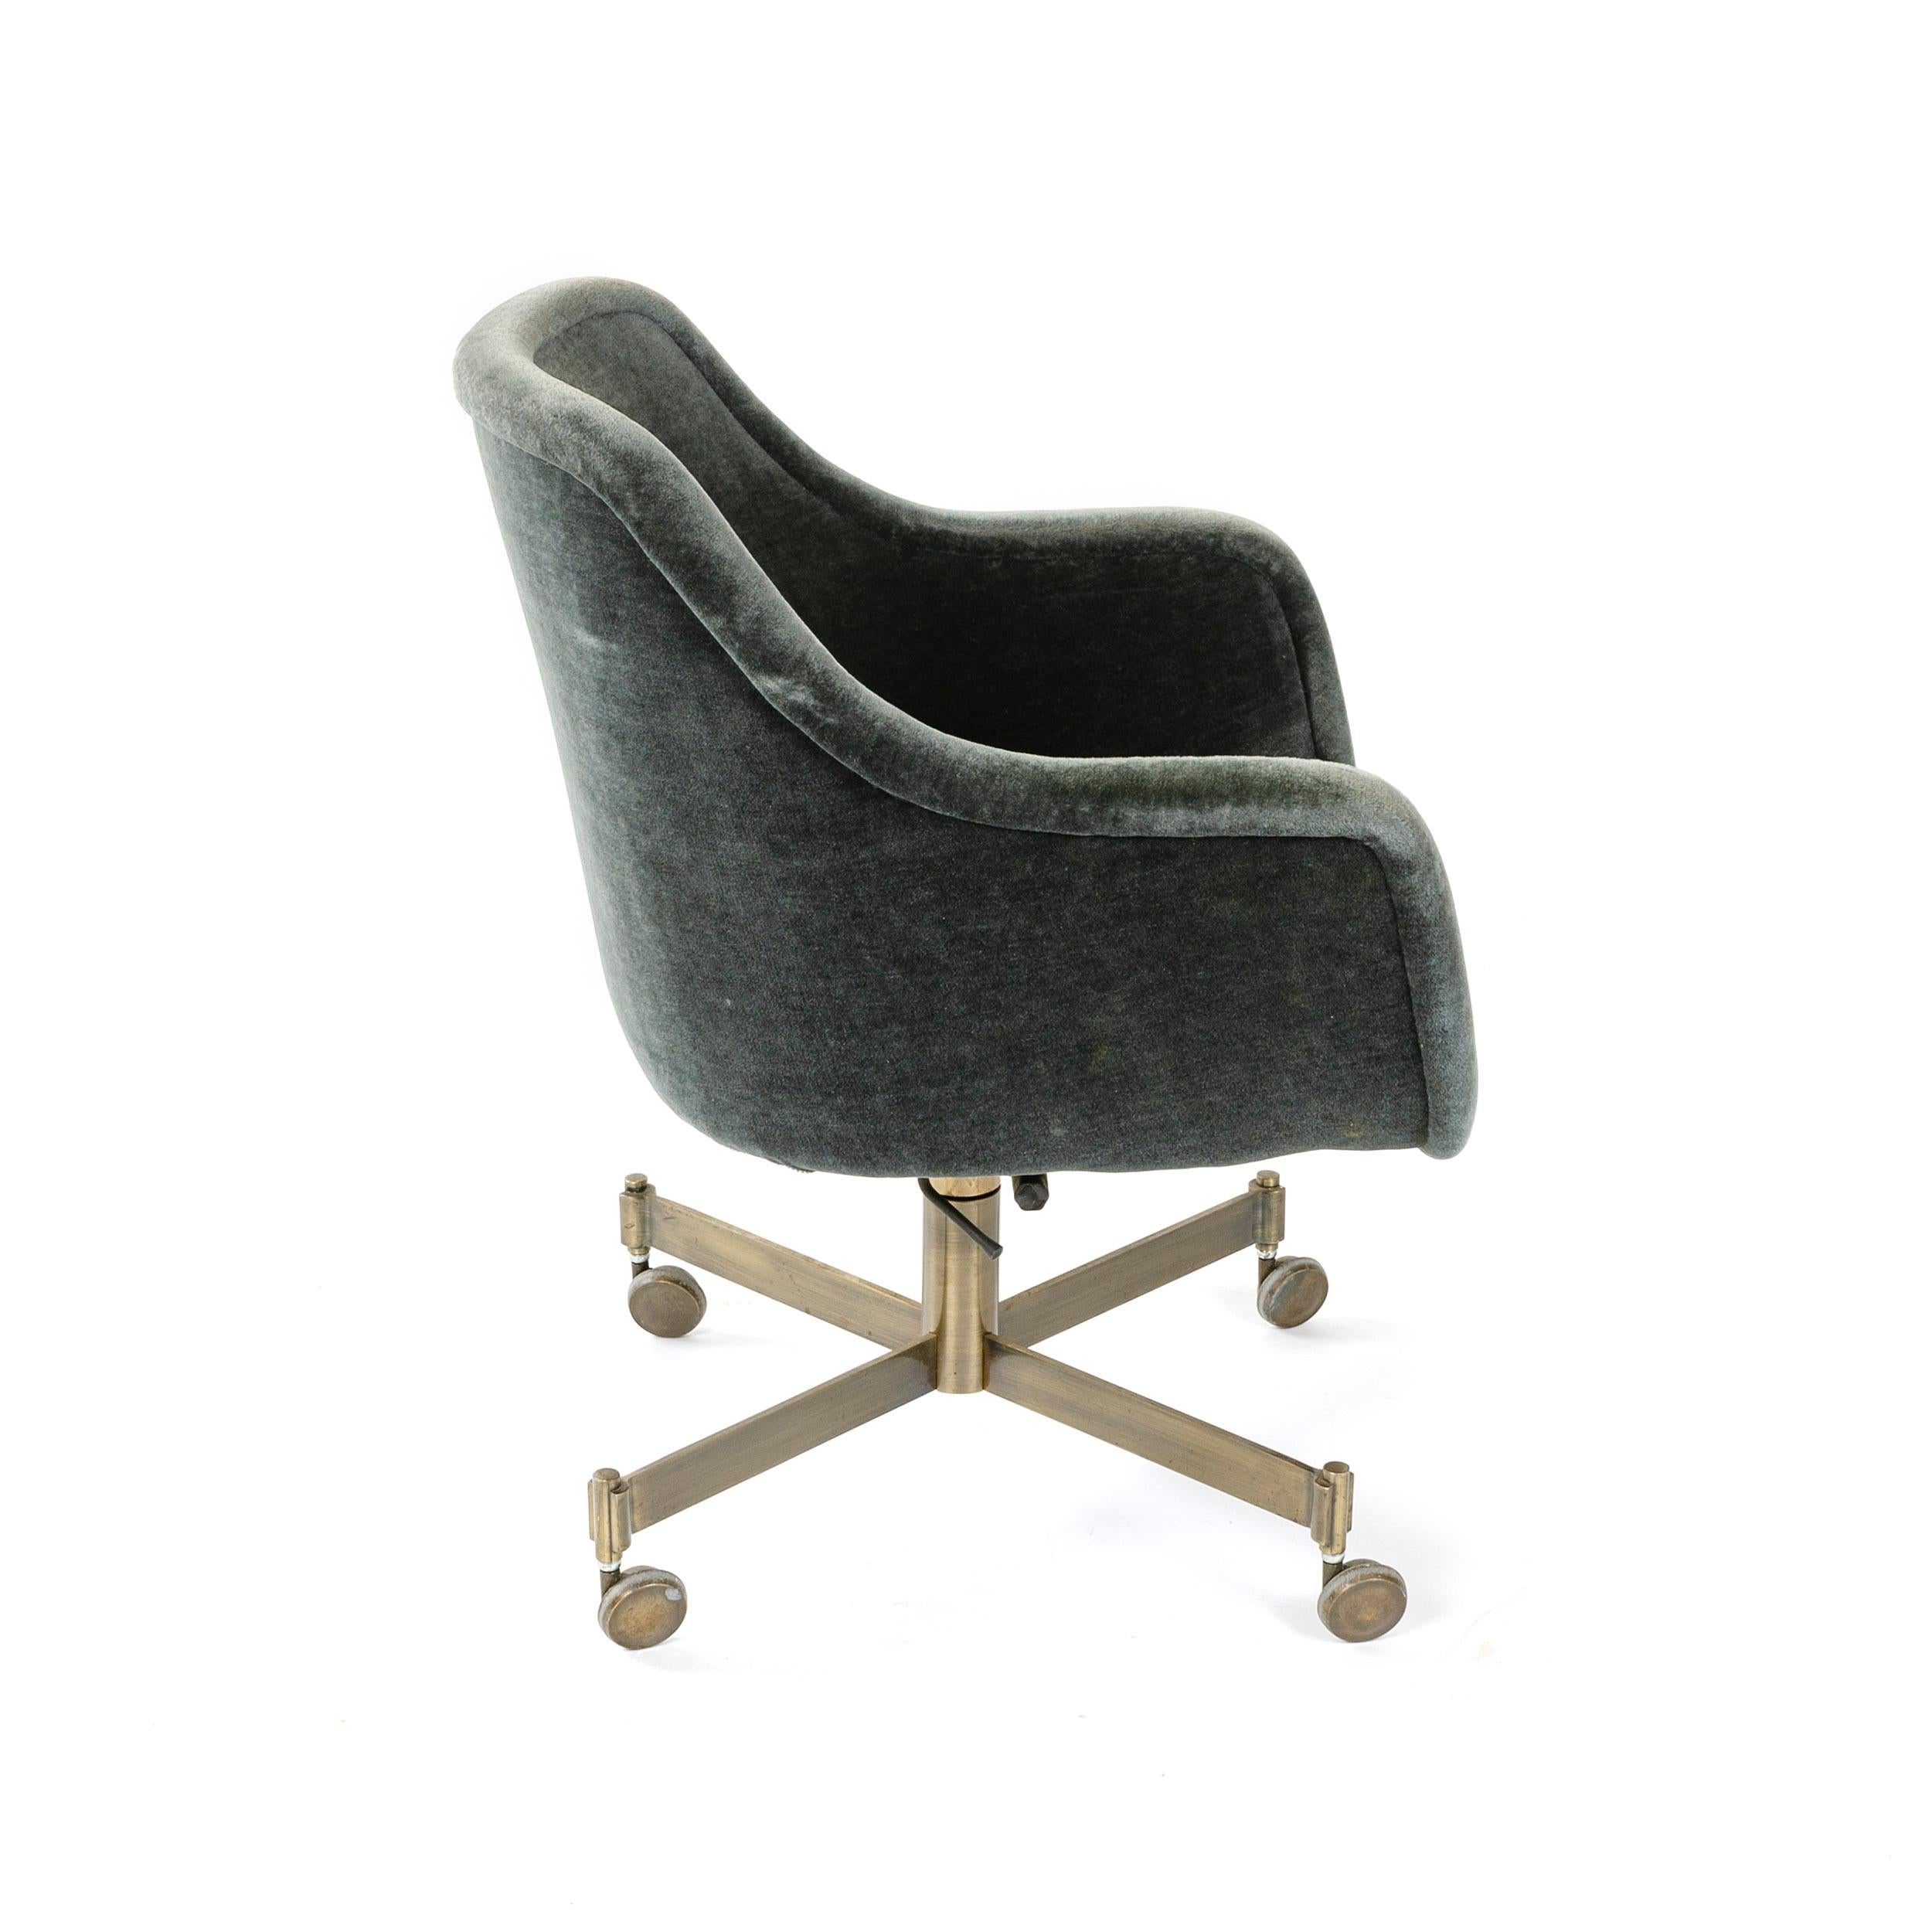 A rolling executive desk chair in vintage blue-grey mohair supported by a bronze-plated swivel base with casters.